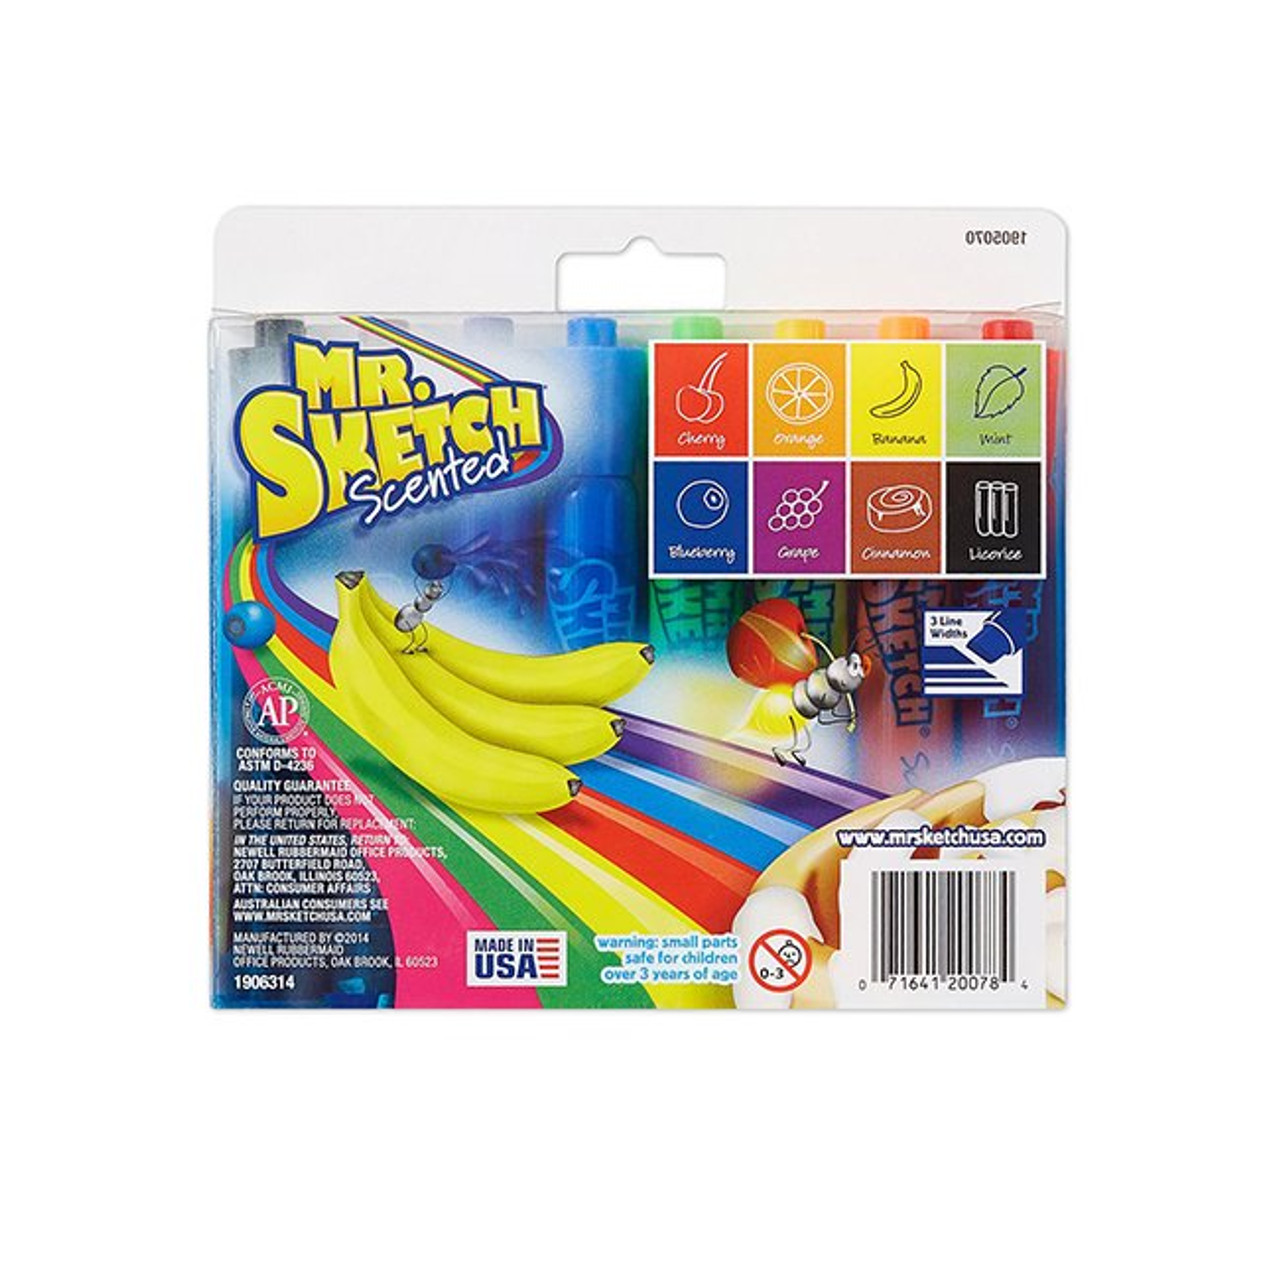 Mr. Sketch Scented Watercolor Markers, 8 Pack